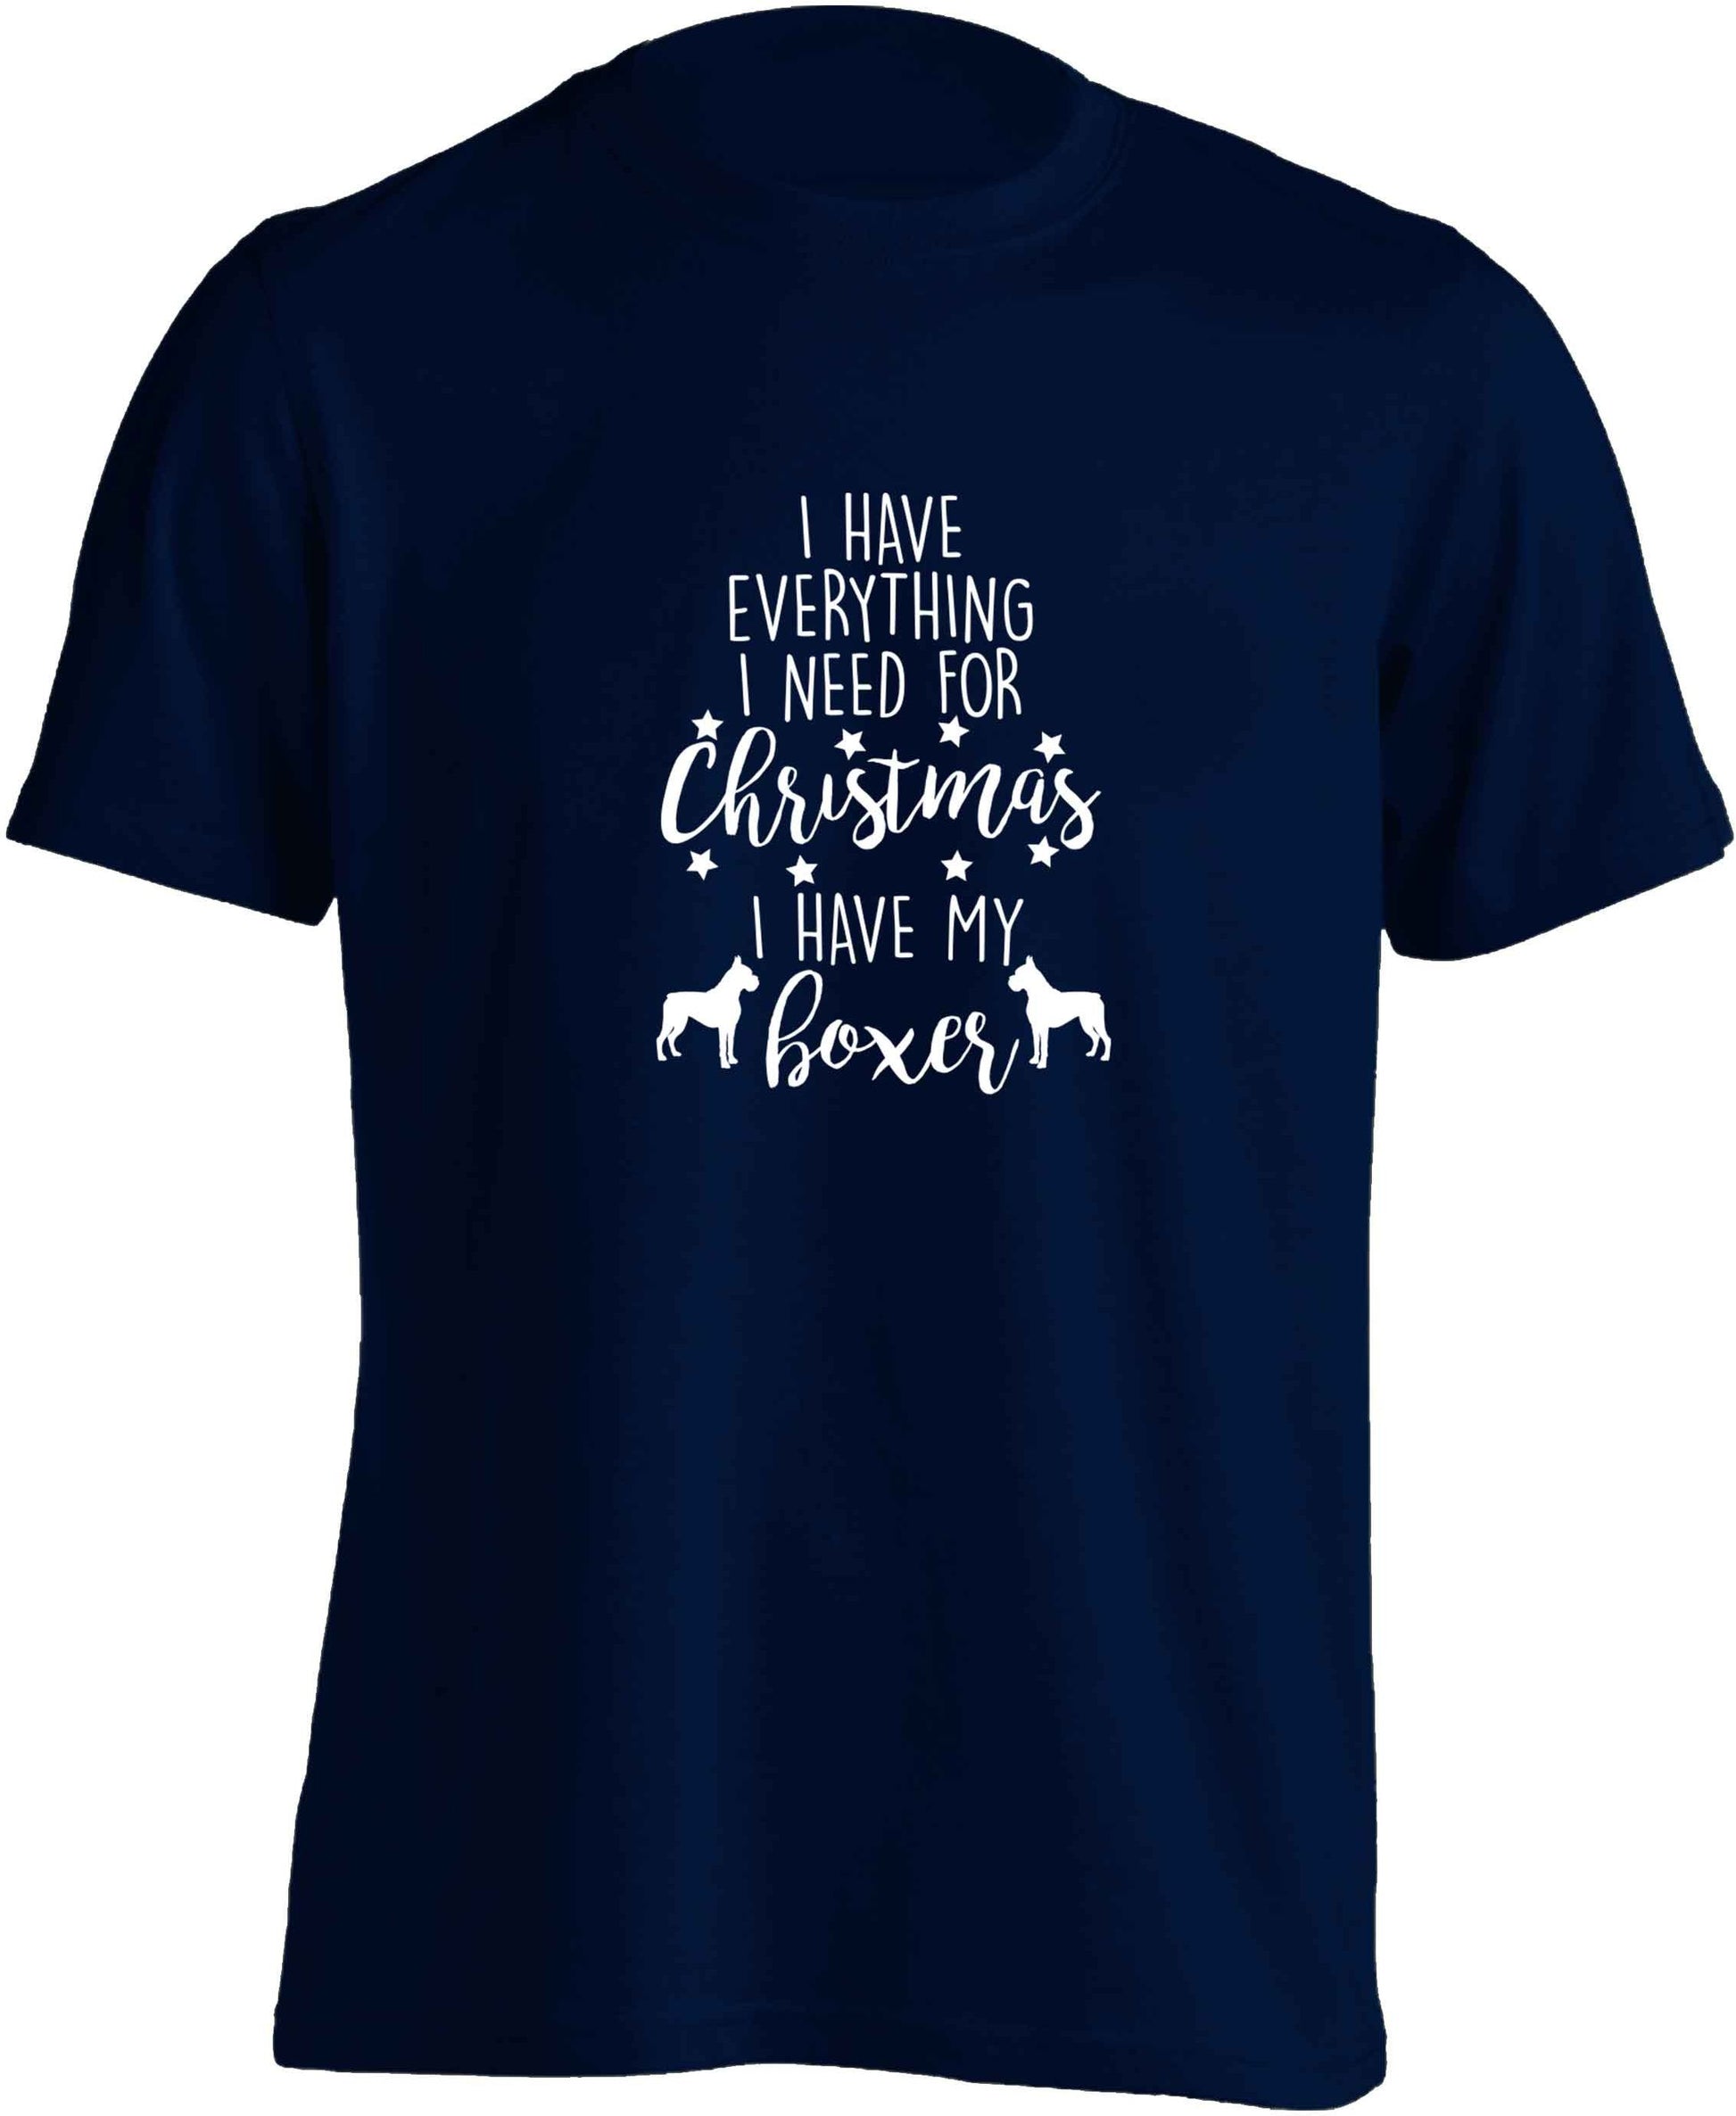 I have everything I need for Christmas I have my boxer adults unisex navy Tshirt 2XL